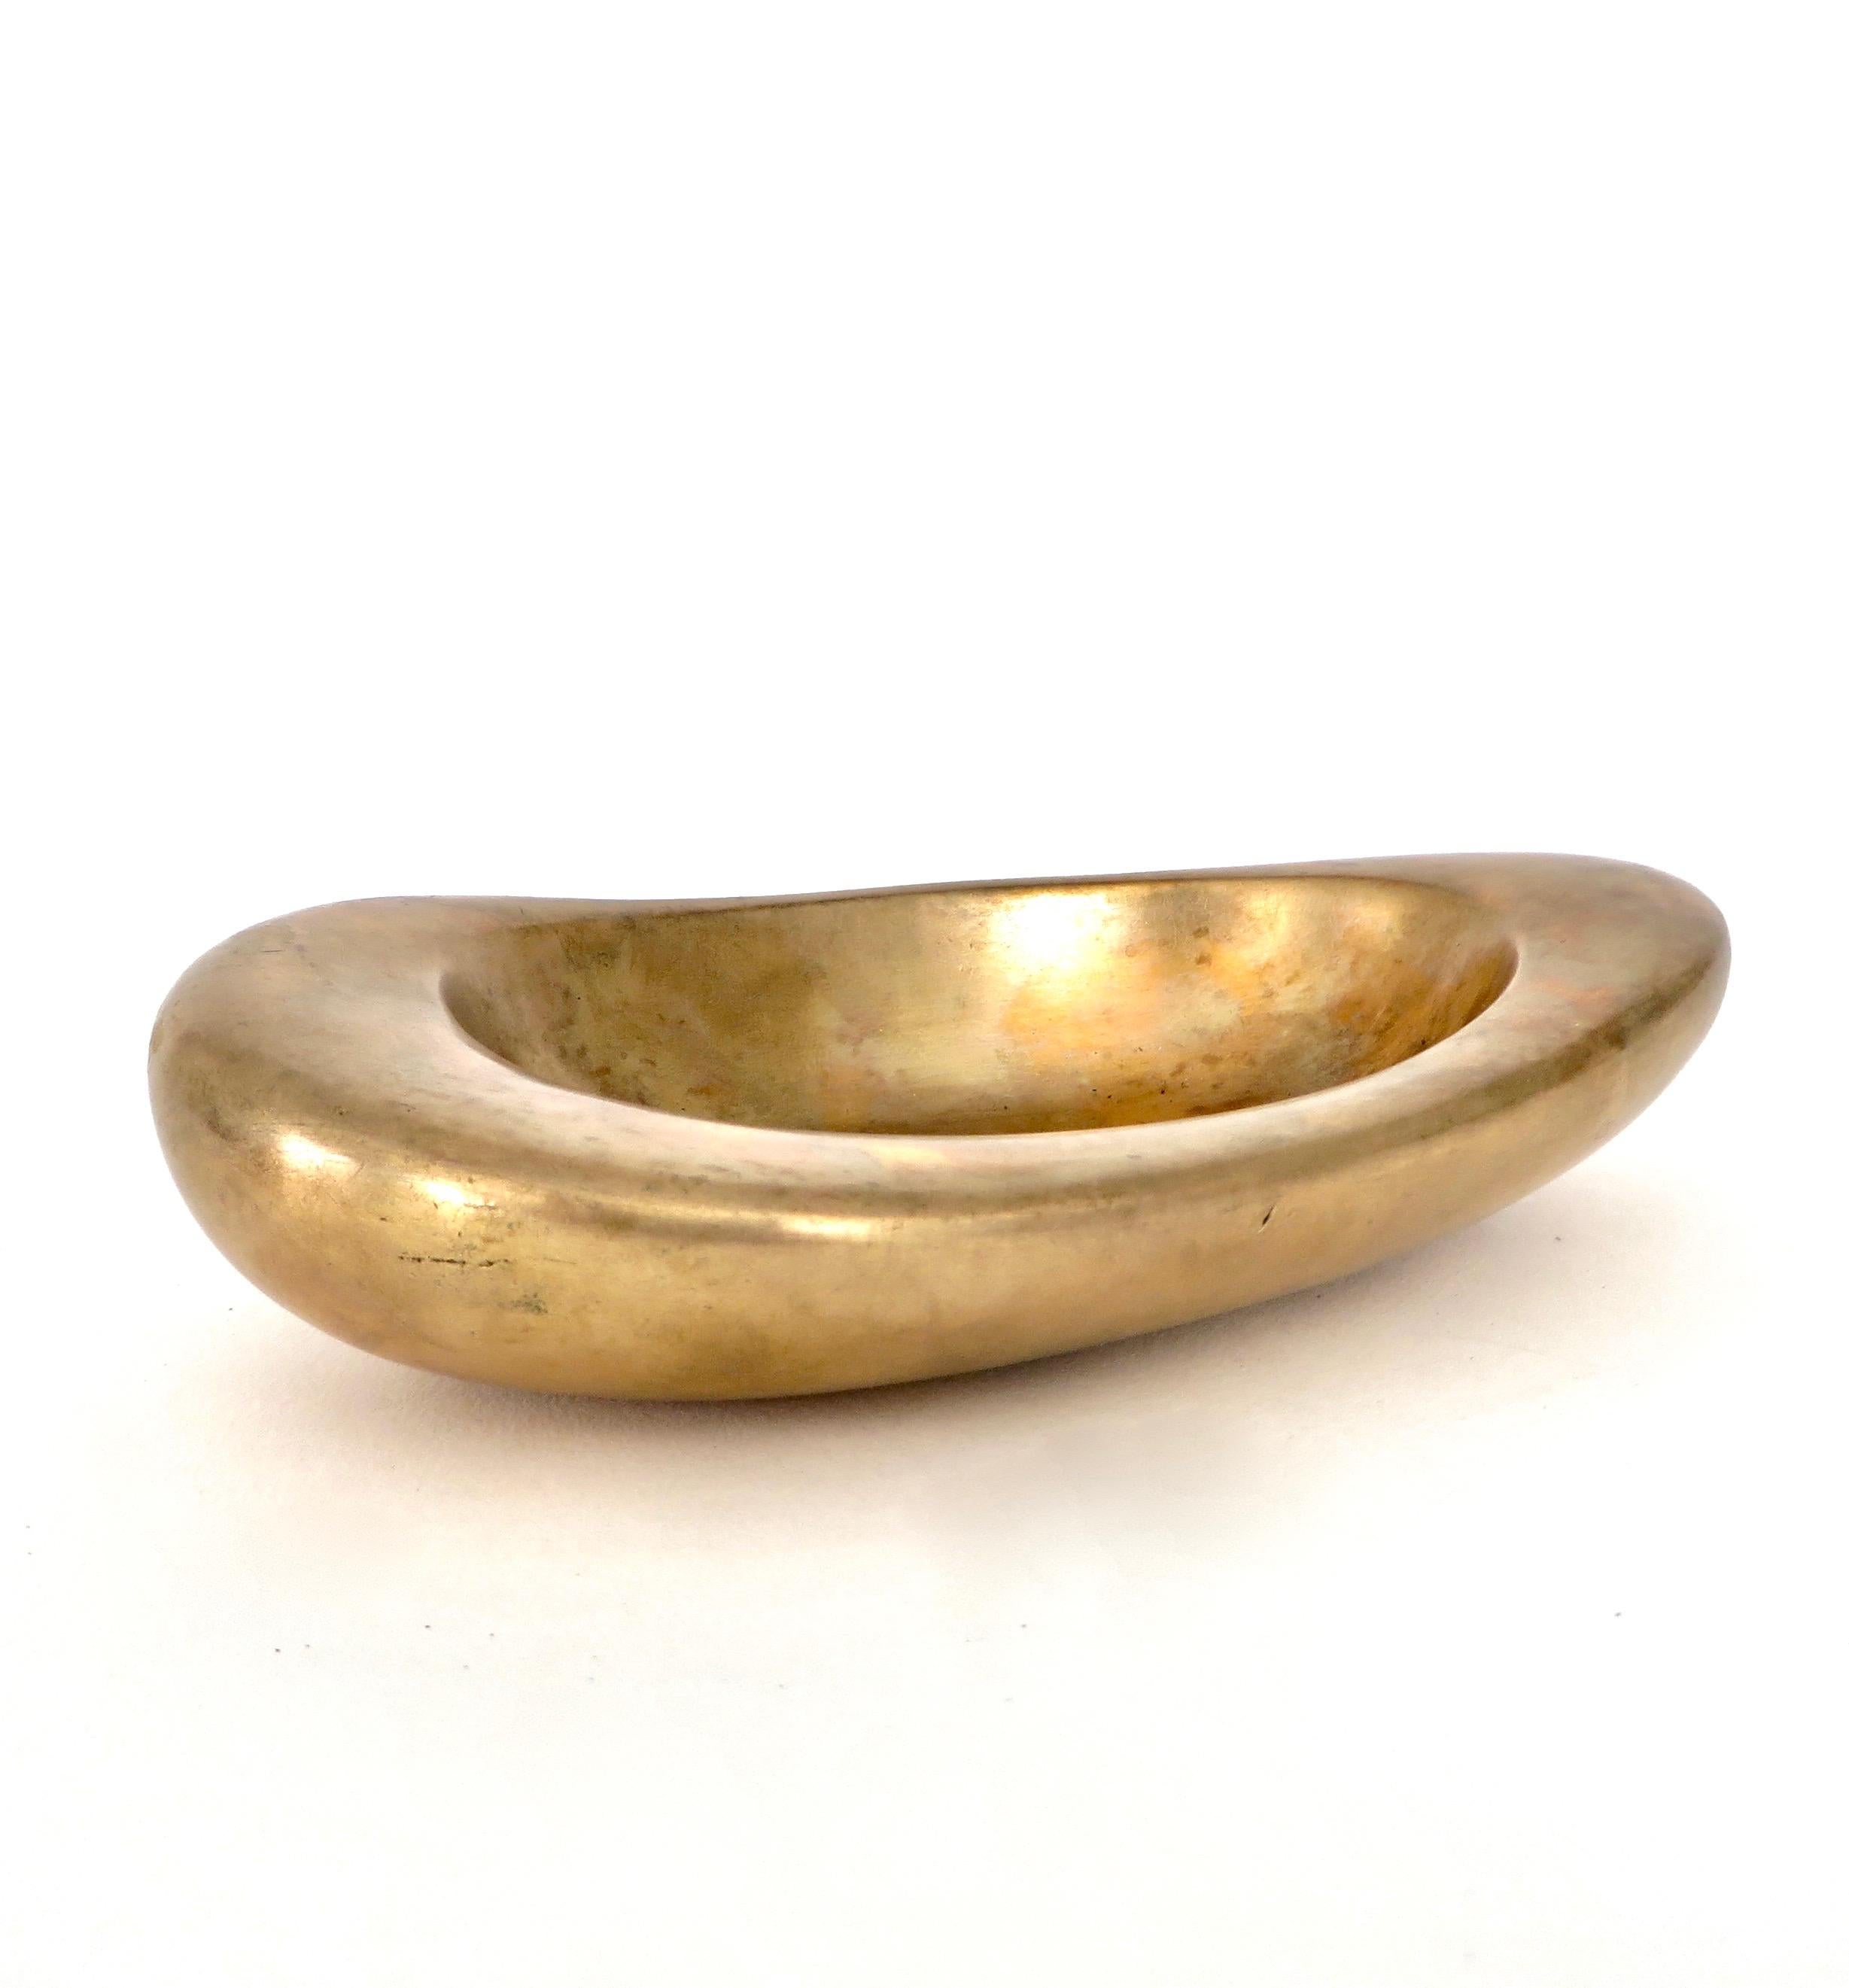 Bronze elongated oval bowl, vide poche or coupe by French artist and designer Monique Gerber. 
Monique Gerber was a French artist working in bronze creating objects for various other artists and companies such as Elsa Schiaparelli and Claude du